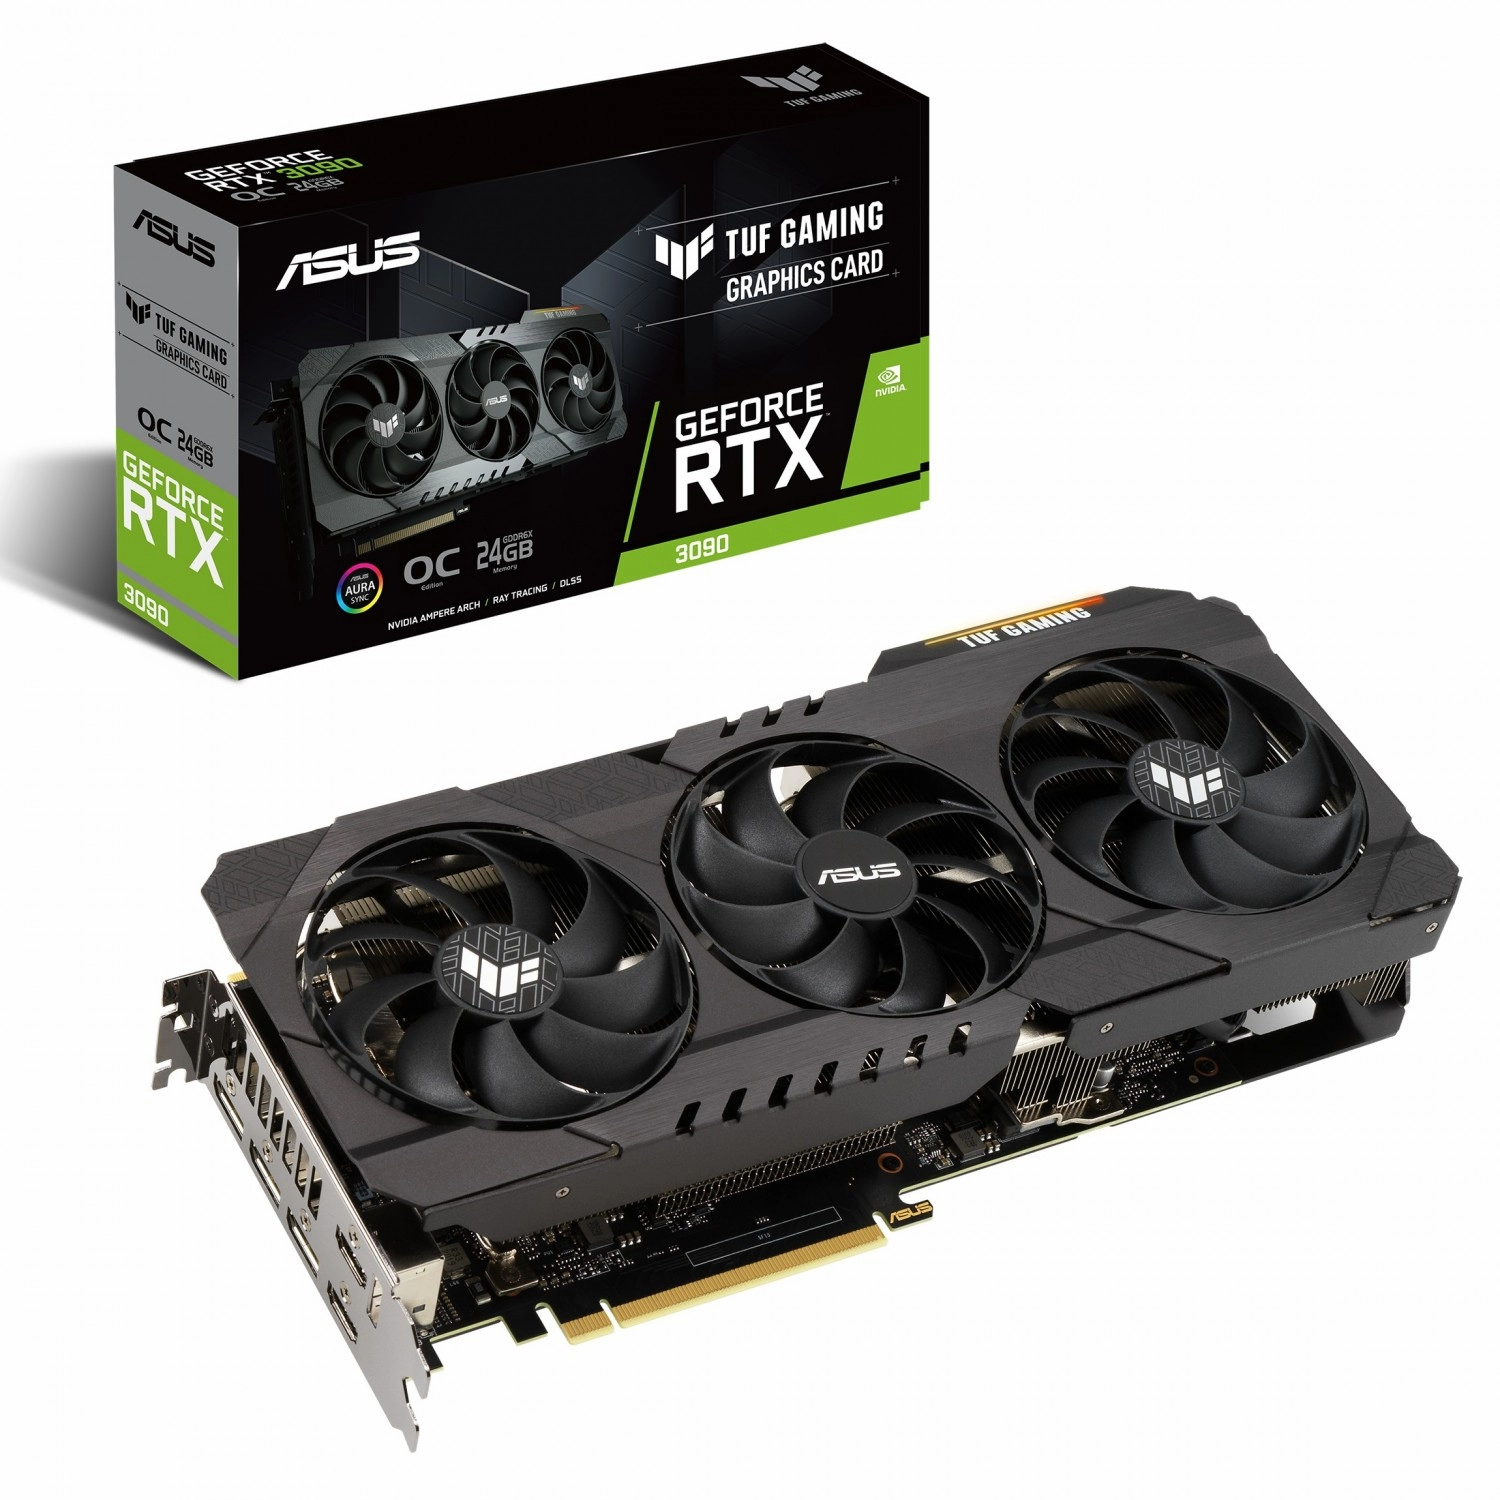 ASUS TUF Gaming GeForce RTX 3090 OC Edition Package